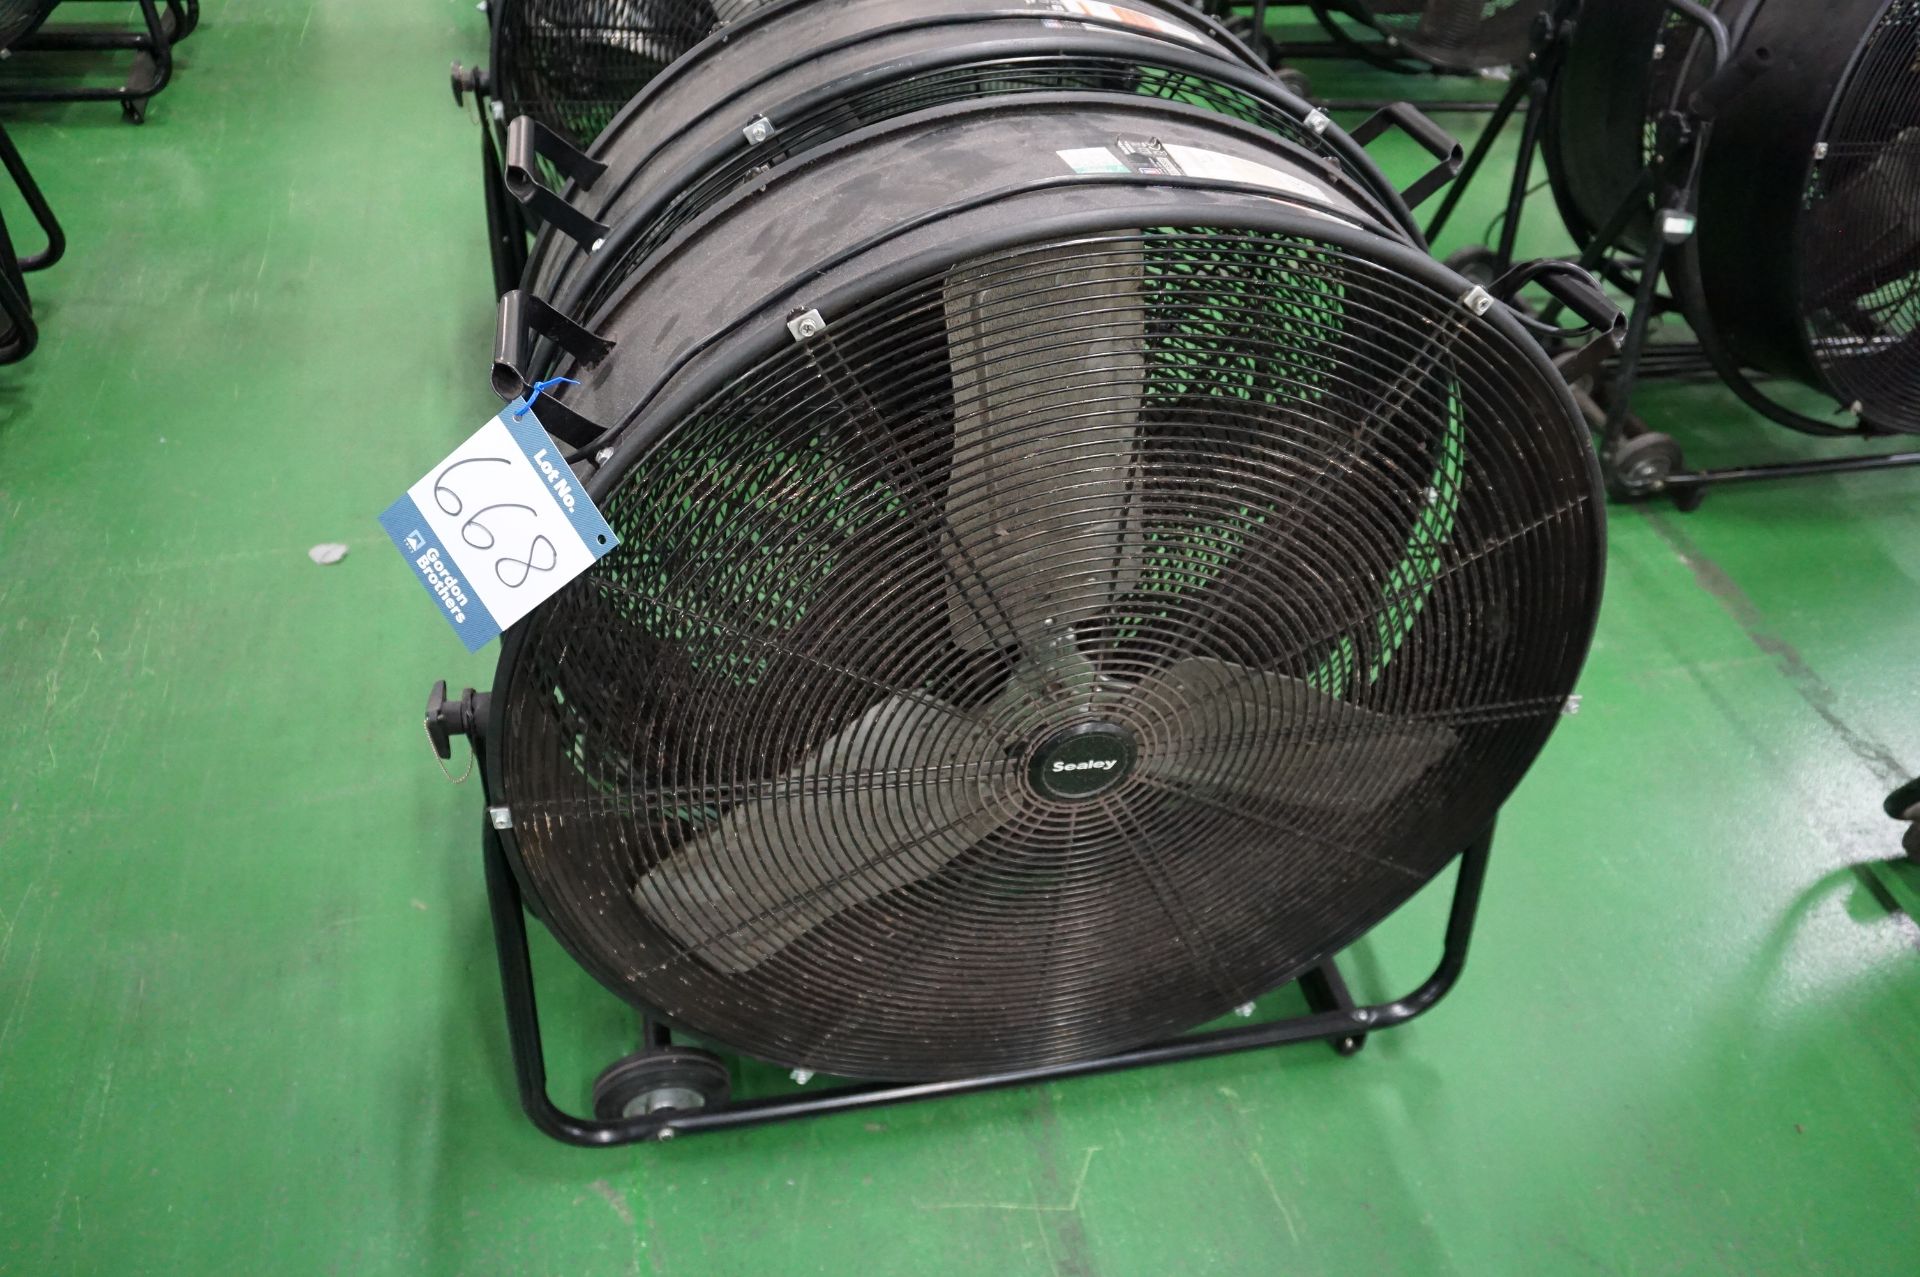 2 x Sealey HVD30v2 mobile dual speed industrial fans